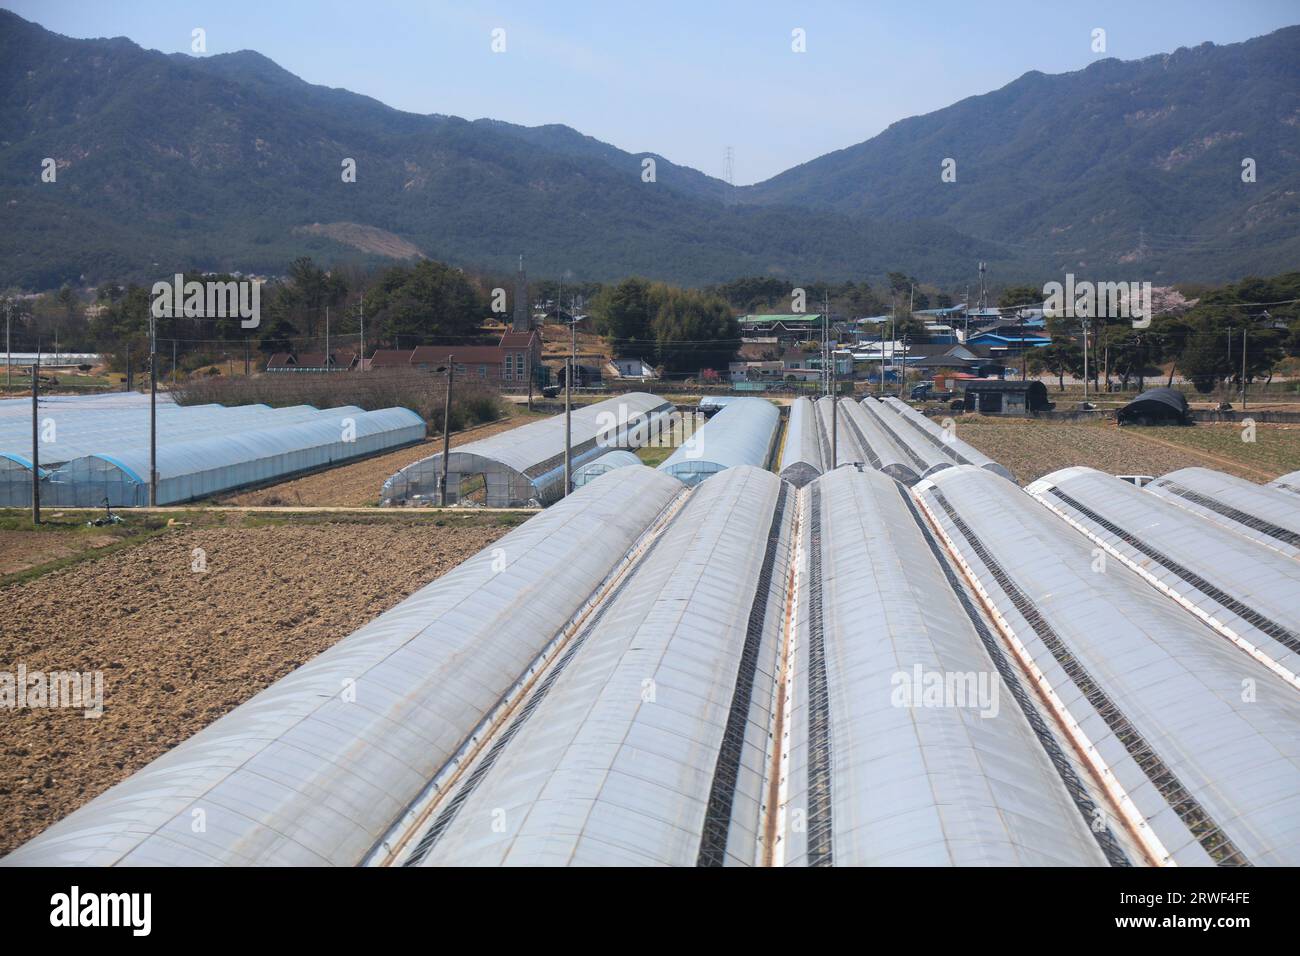 Greenhouse agriculture in South Korea. Agriculture in Imsil-gun, North Jeolla province. Stock Photo